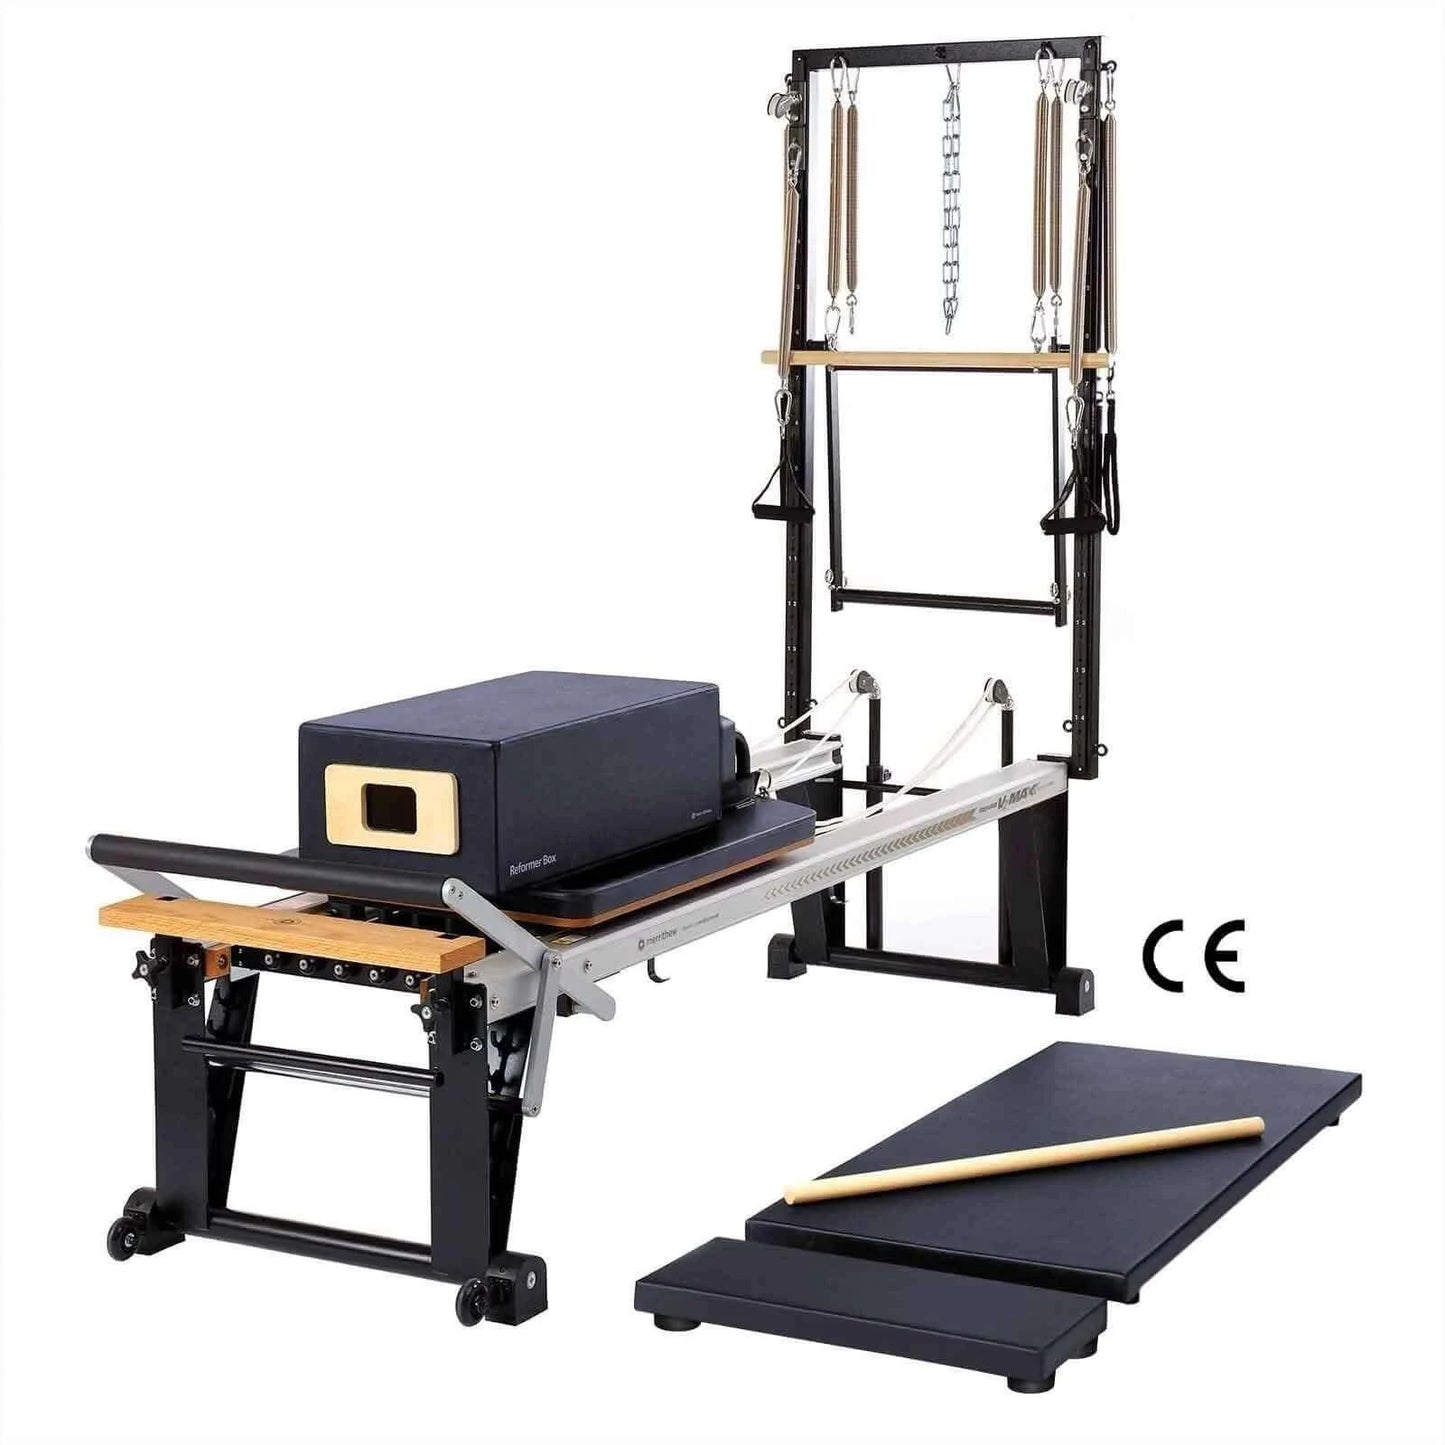 Eclipse Merrithew™ Pilates Rehab V2 Max Plus™ Reformer Bundle by Merrithew™ sold by Pilates Matters® by BSP LLC